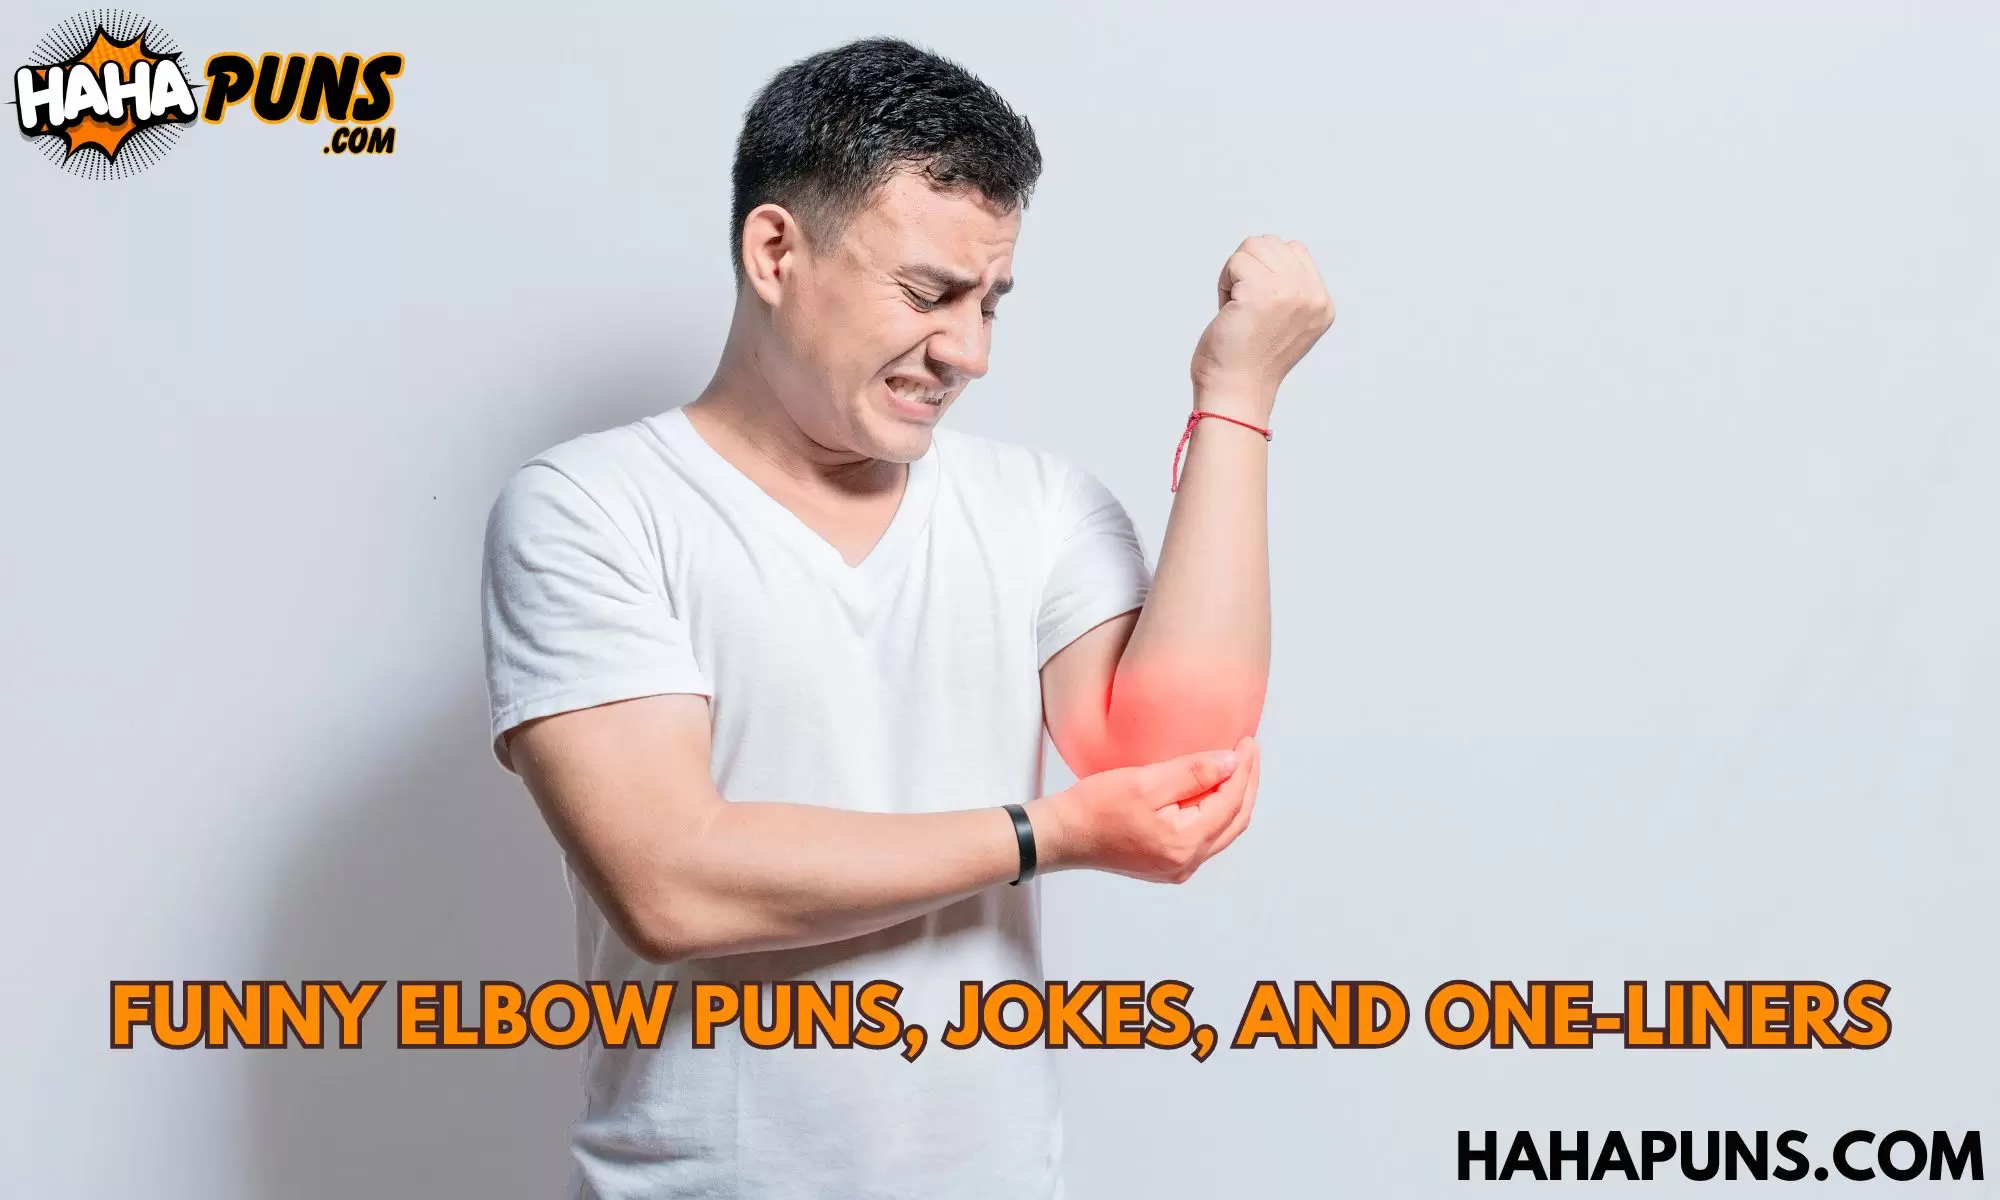 Funny Elbow Puns, Jokes, and One-Liners